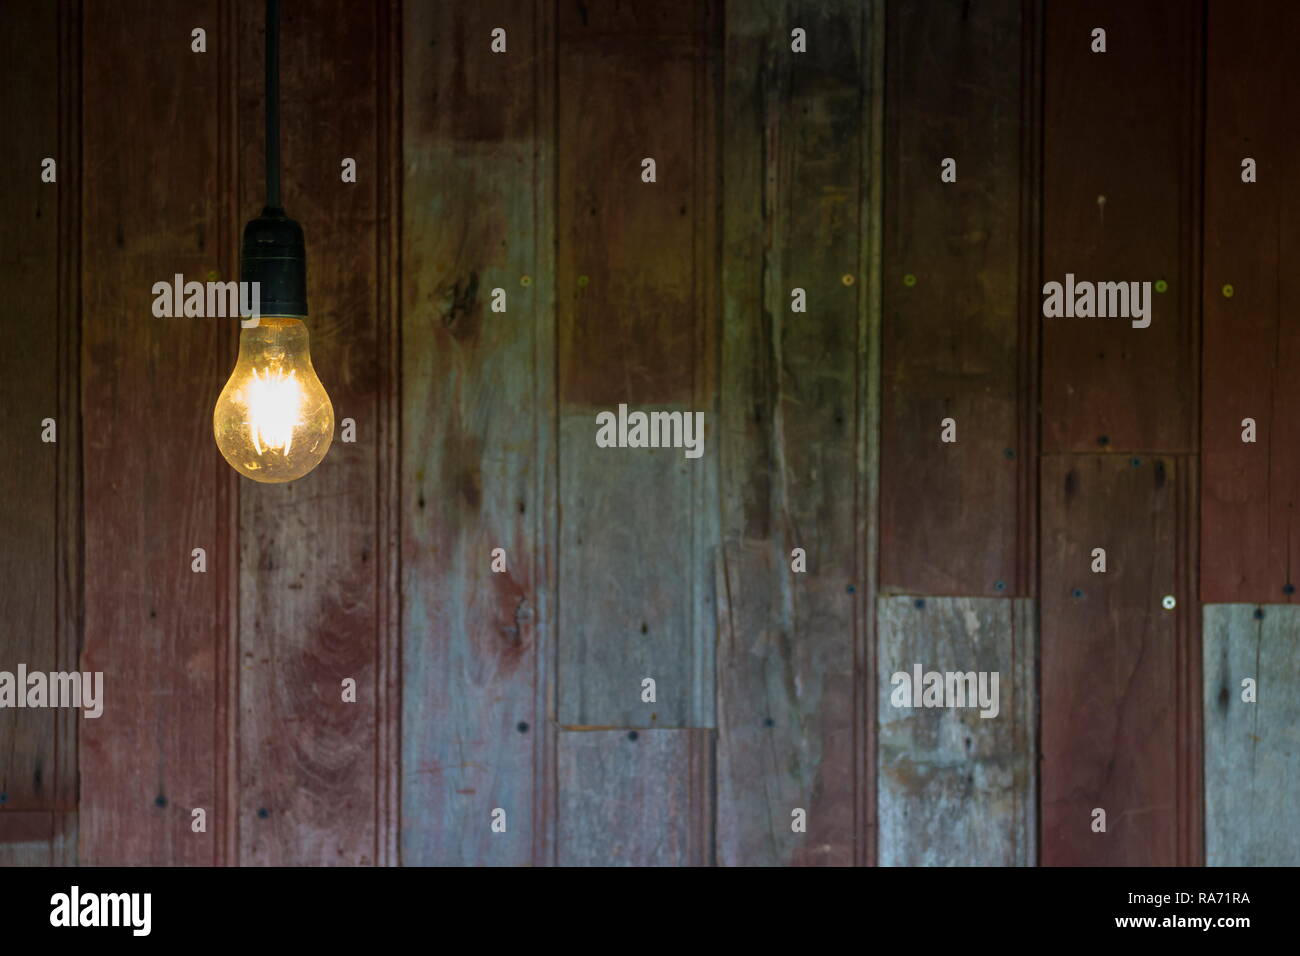 Light from vintage light bulb with old wood wall background, image with copy space. Stock Photo